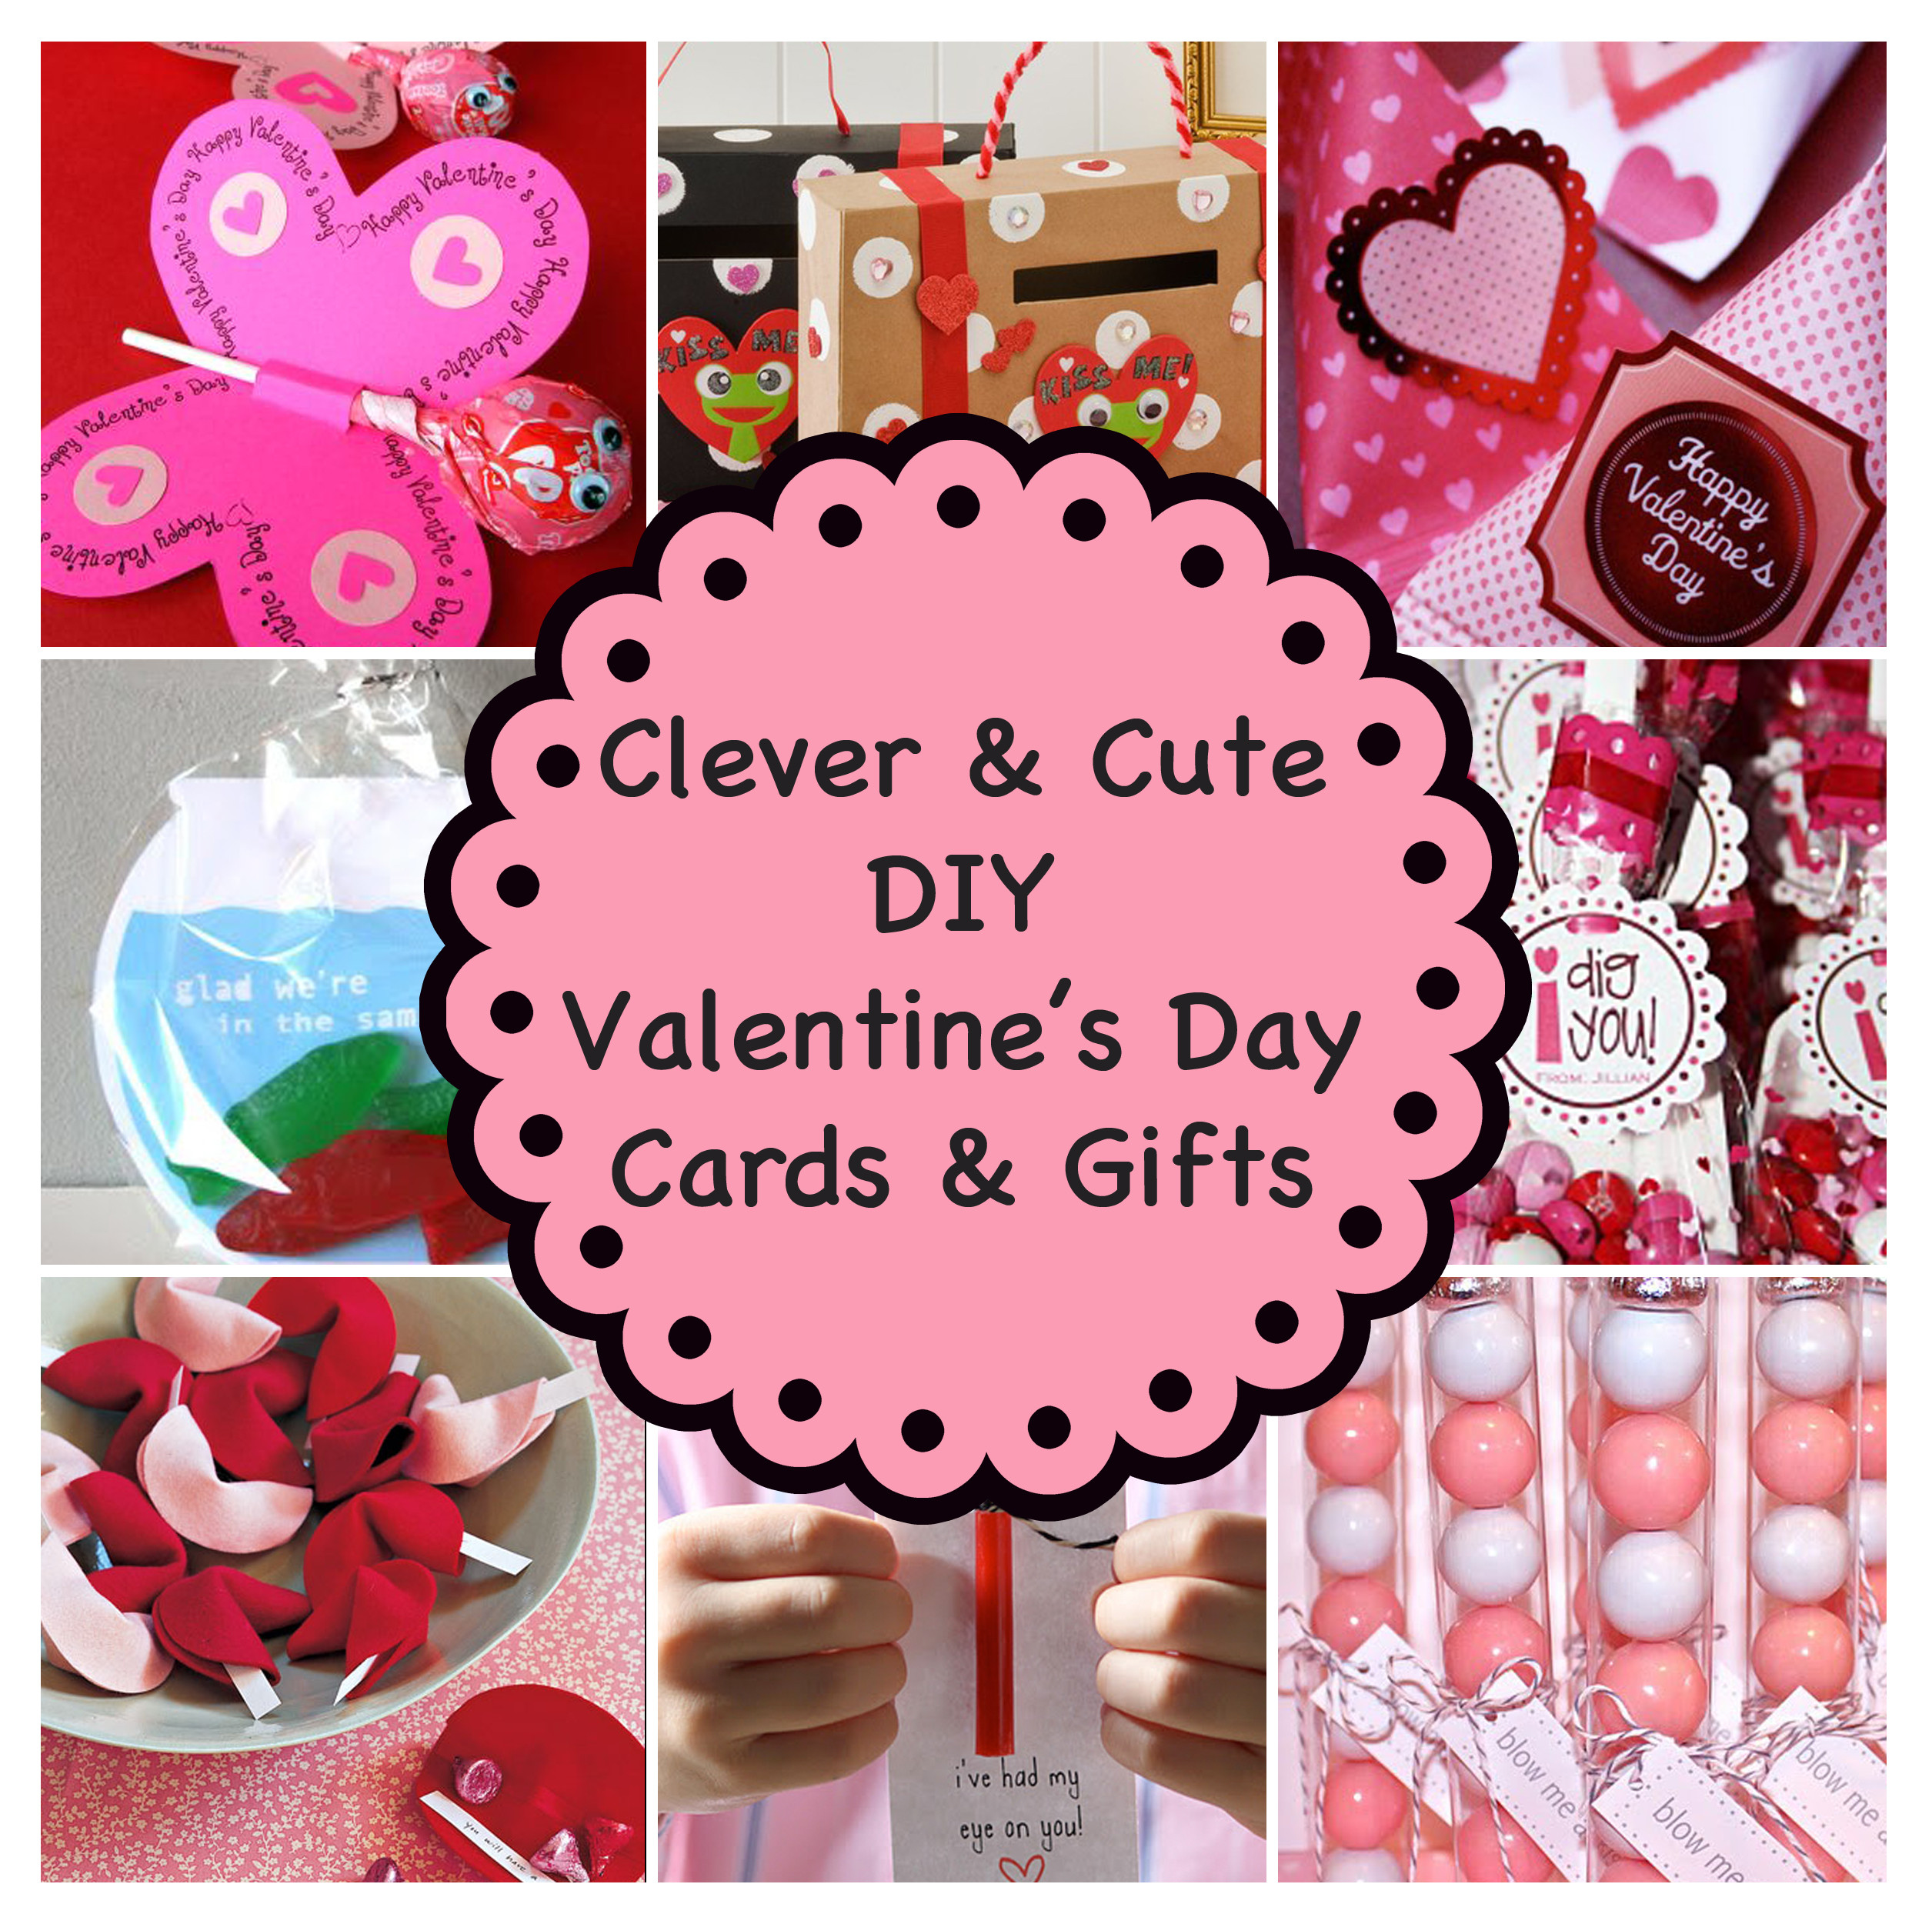 Top Valentines Day Gifts
 Clever and Cute DIY Valentine’s Day Cards & Gifts